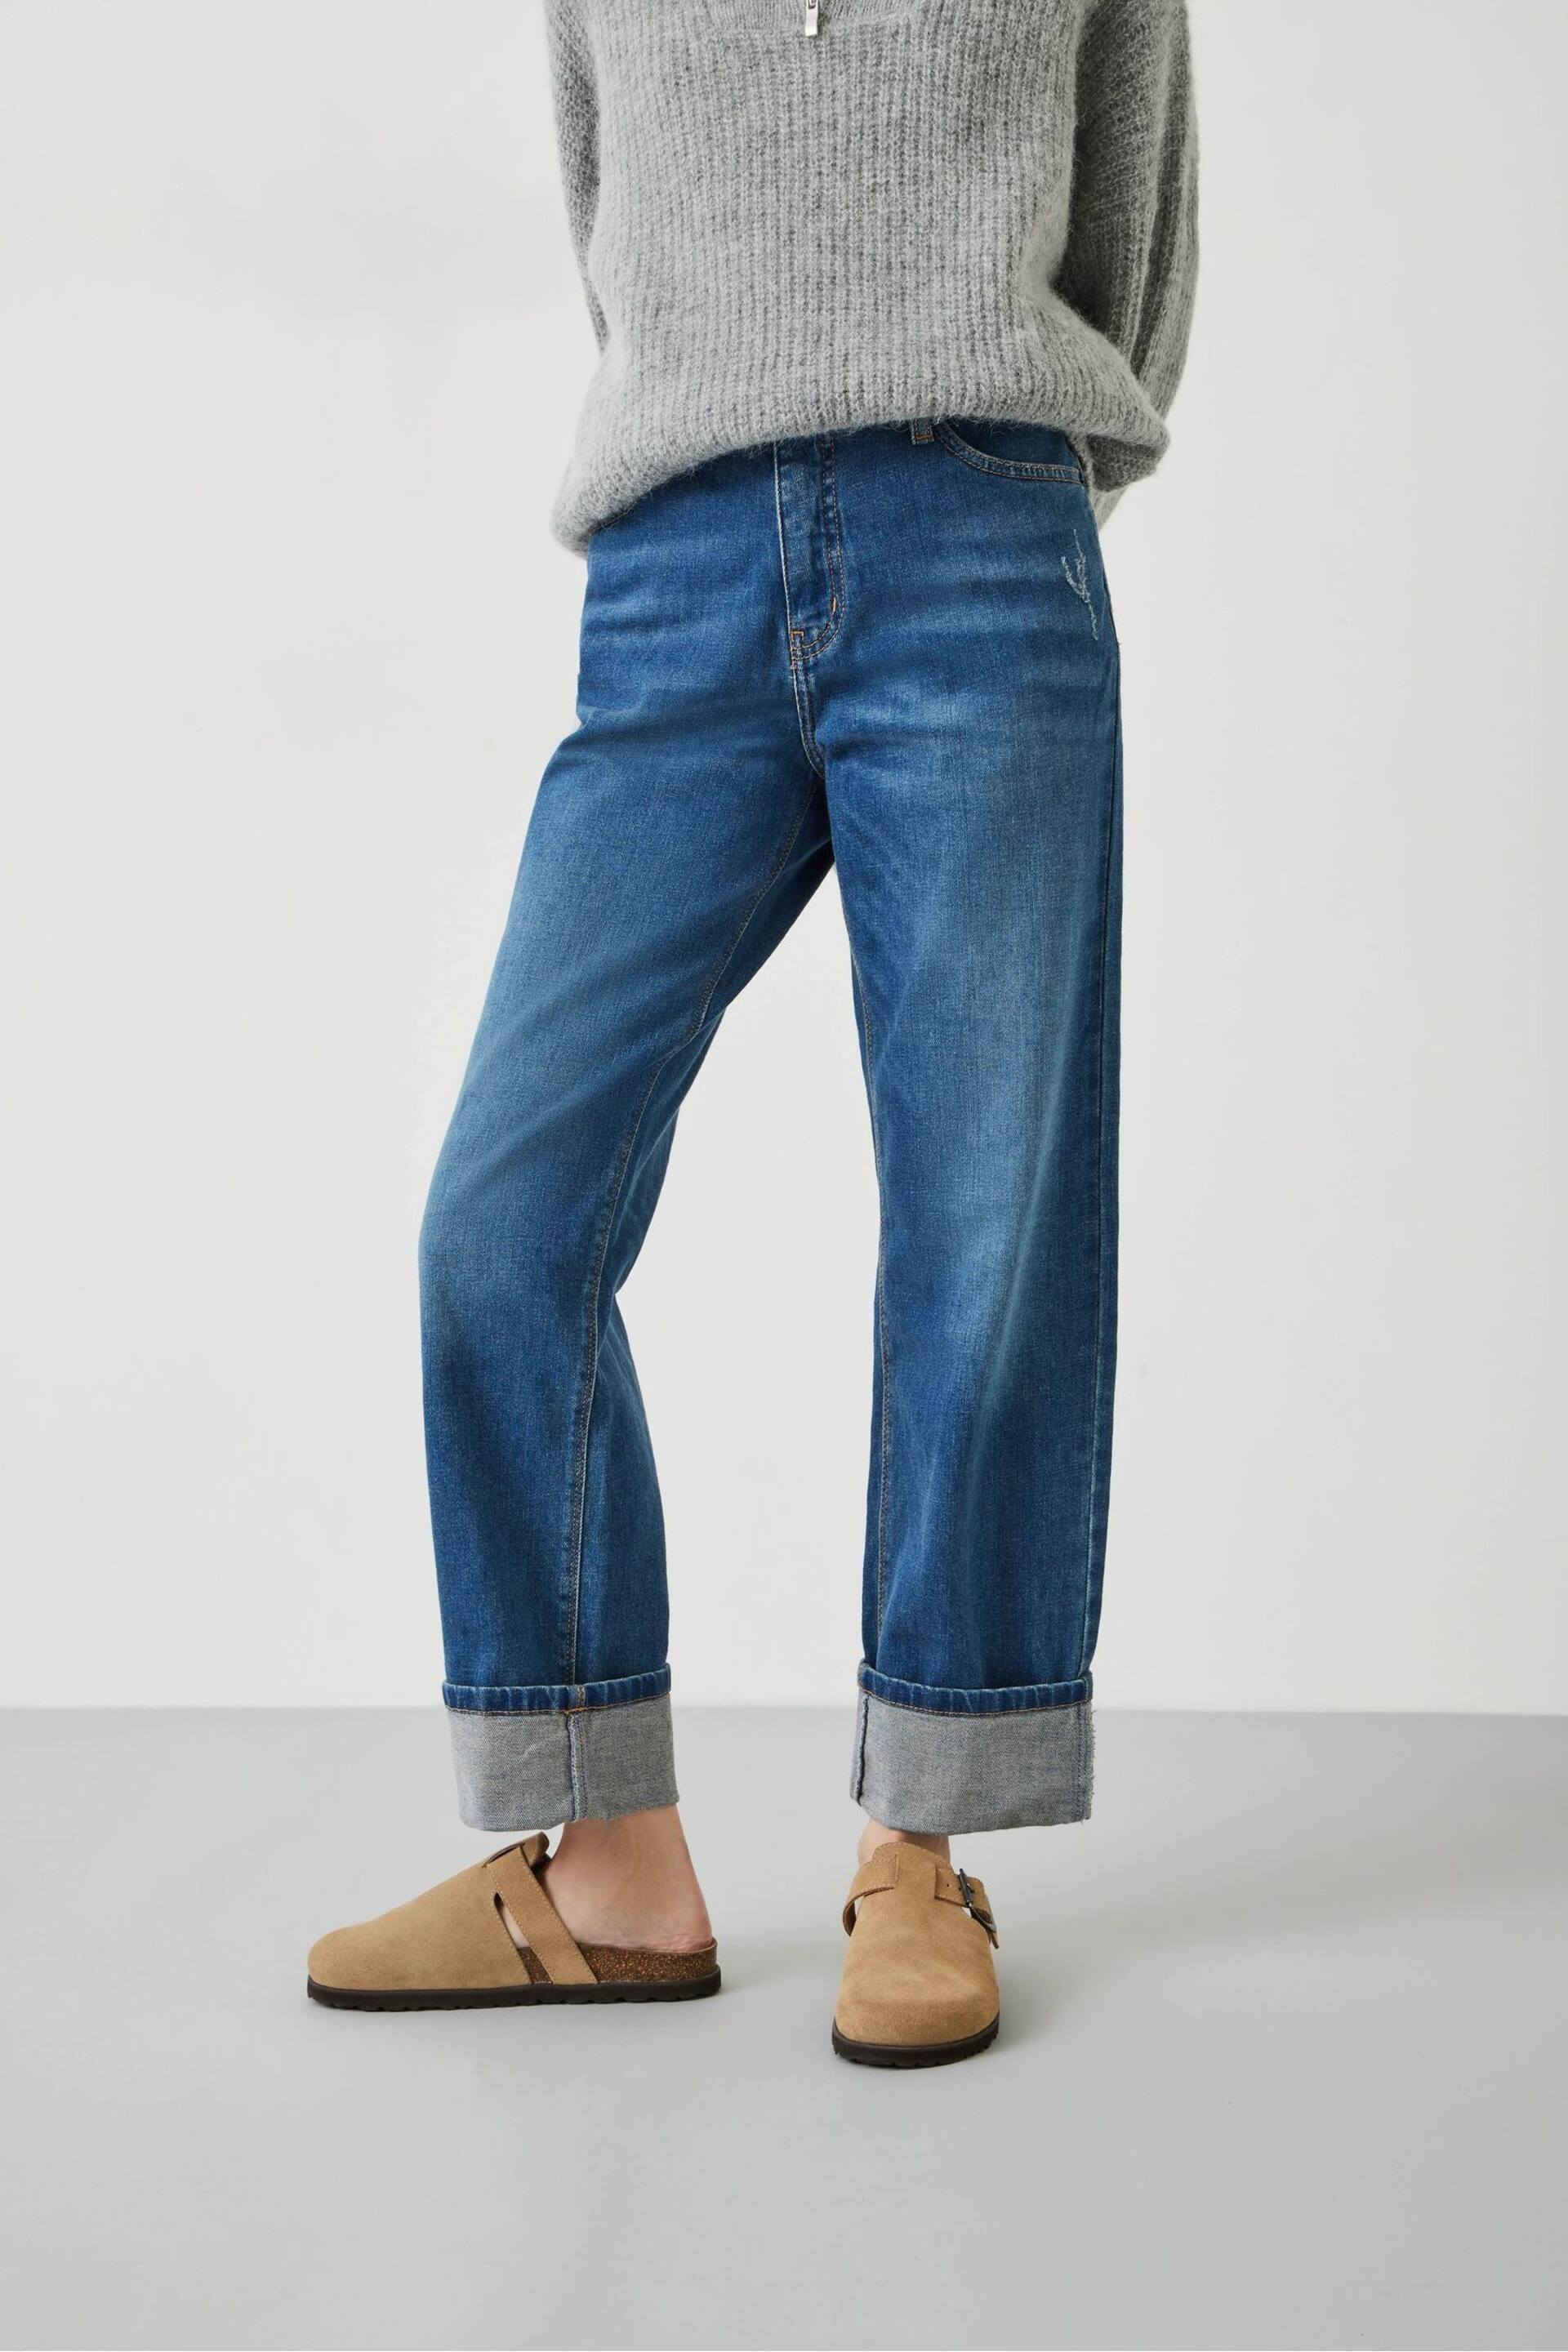 Hush Blue Authentic Agnes Straight Jeans - Image 1 of 5